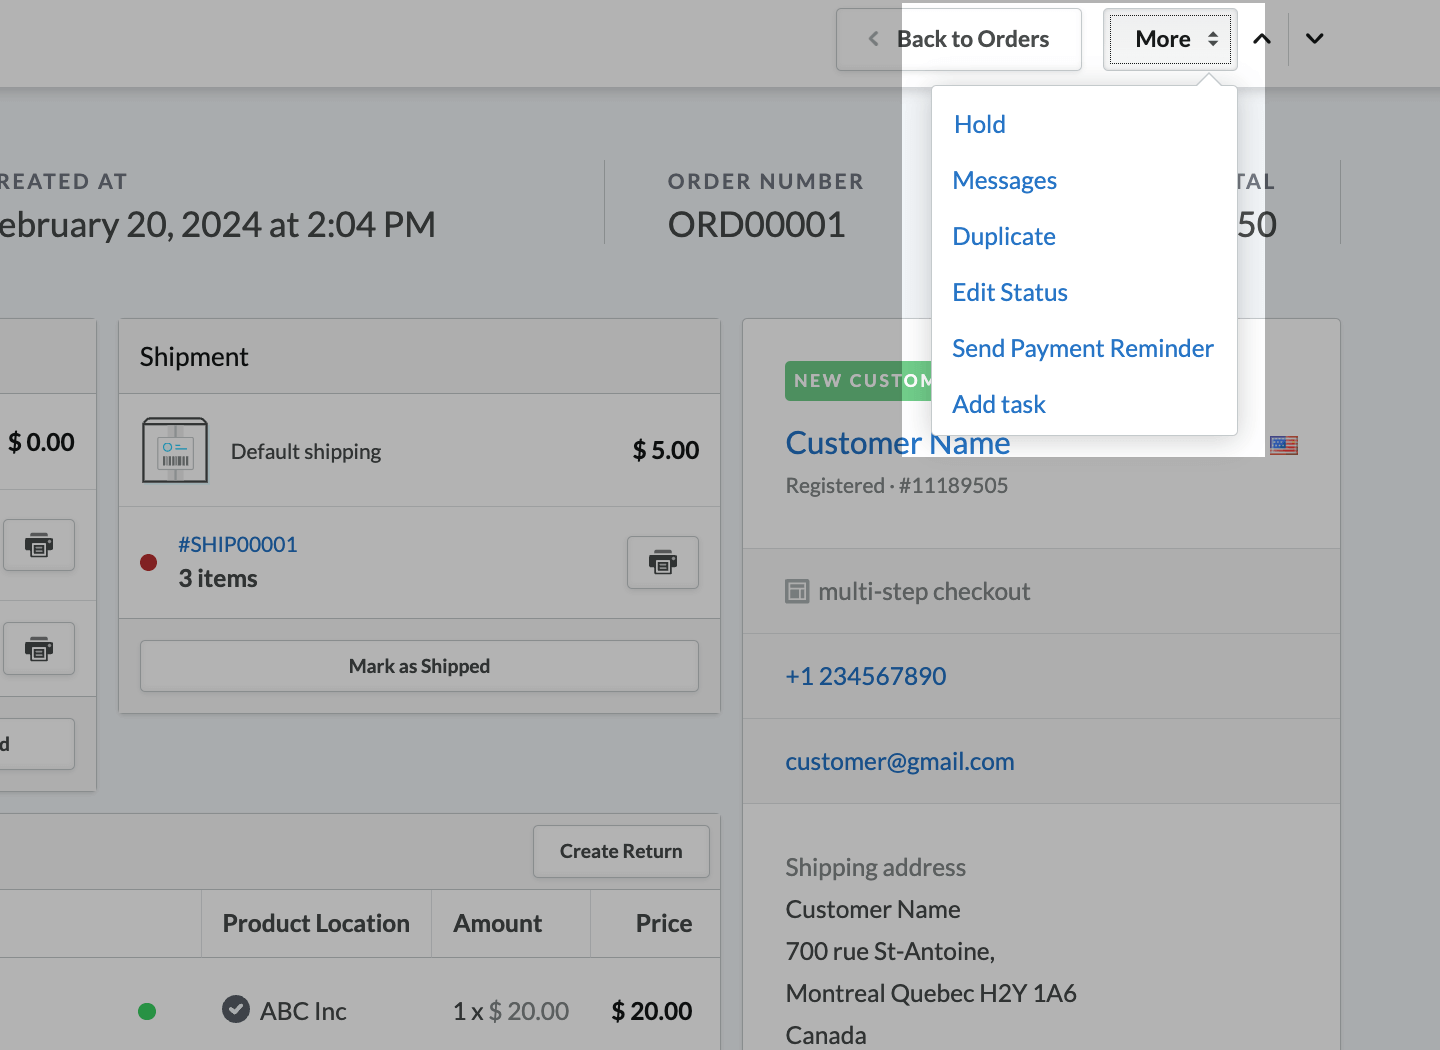 Order page showing More drop-down options.